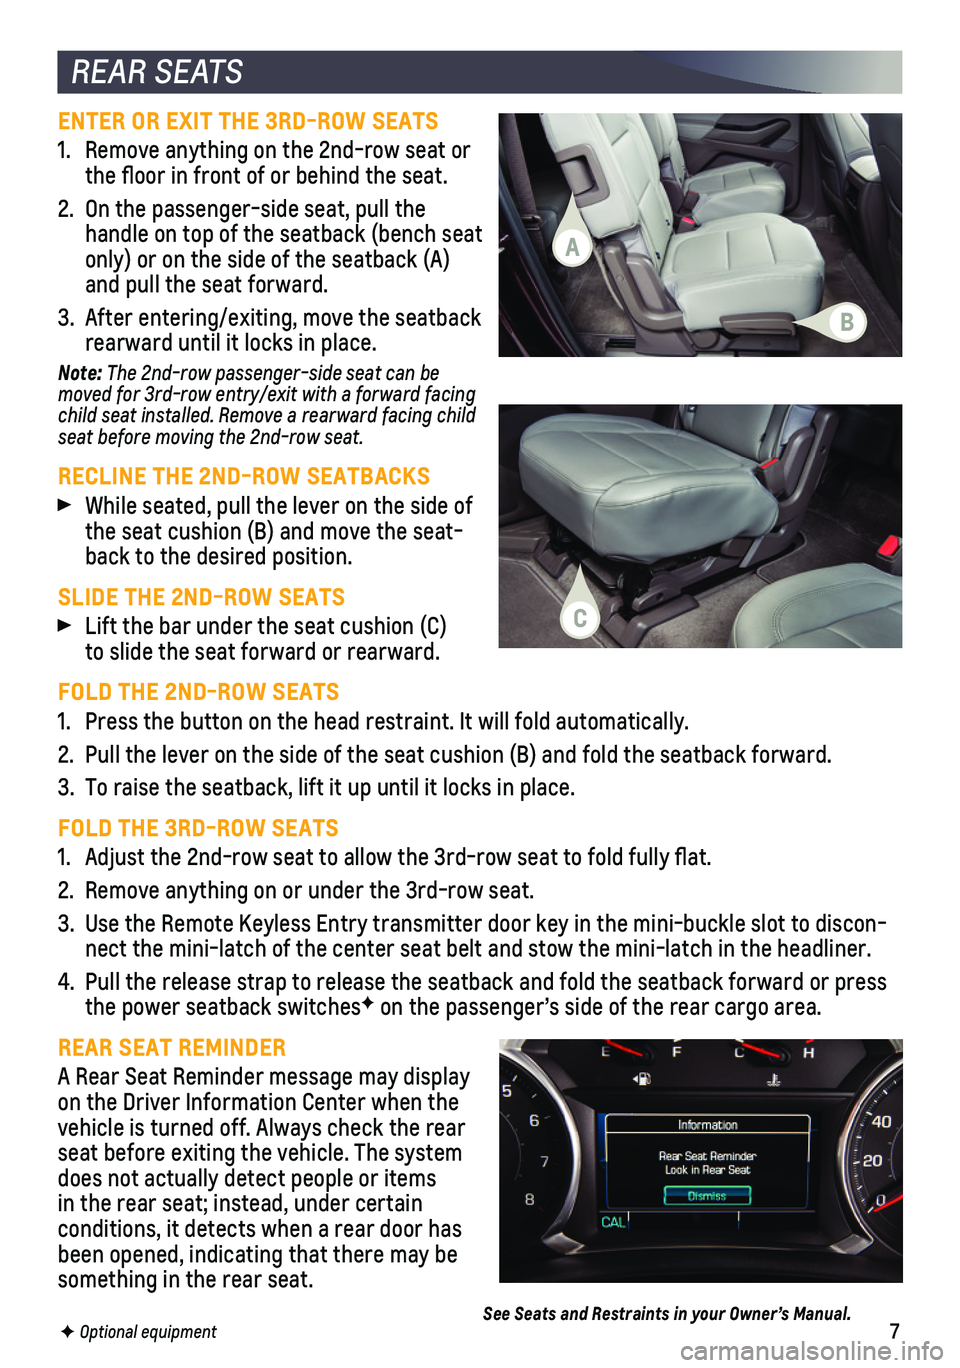 CHEVROLET TRAVERSE 2021  Get To Know Guide 7F Optional equipment  
REAR SEATS
ENTER OR EXIT THE 3RD-ROW SEATS
1. Remove anything on the 2nd-row seat or the floor in front of or behind the seat.
2. On the passenger-side seat, pull the handle on